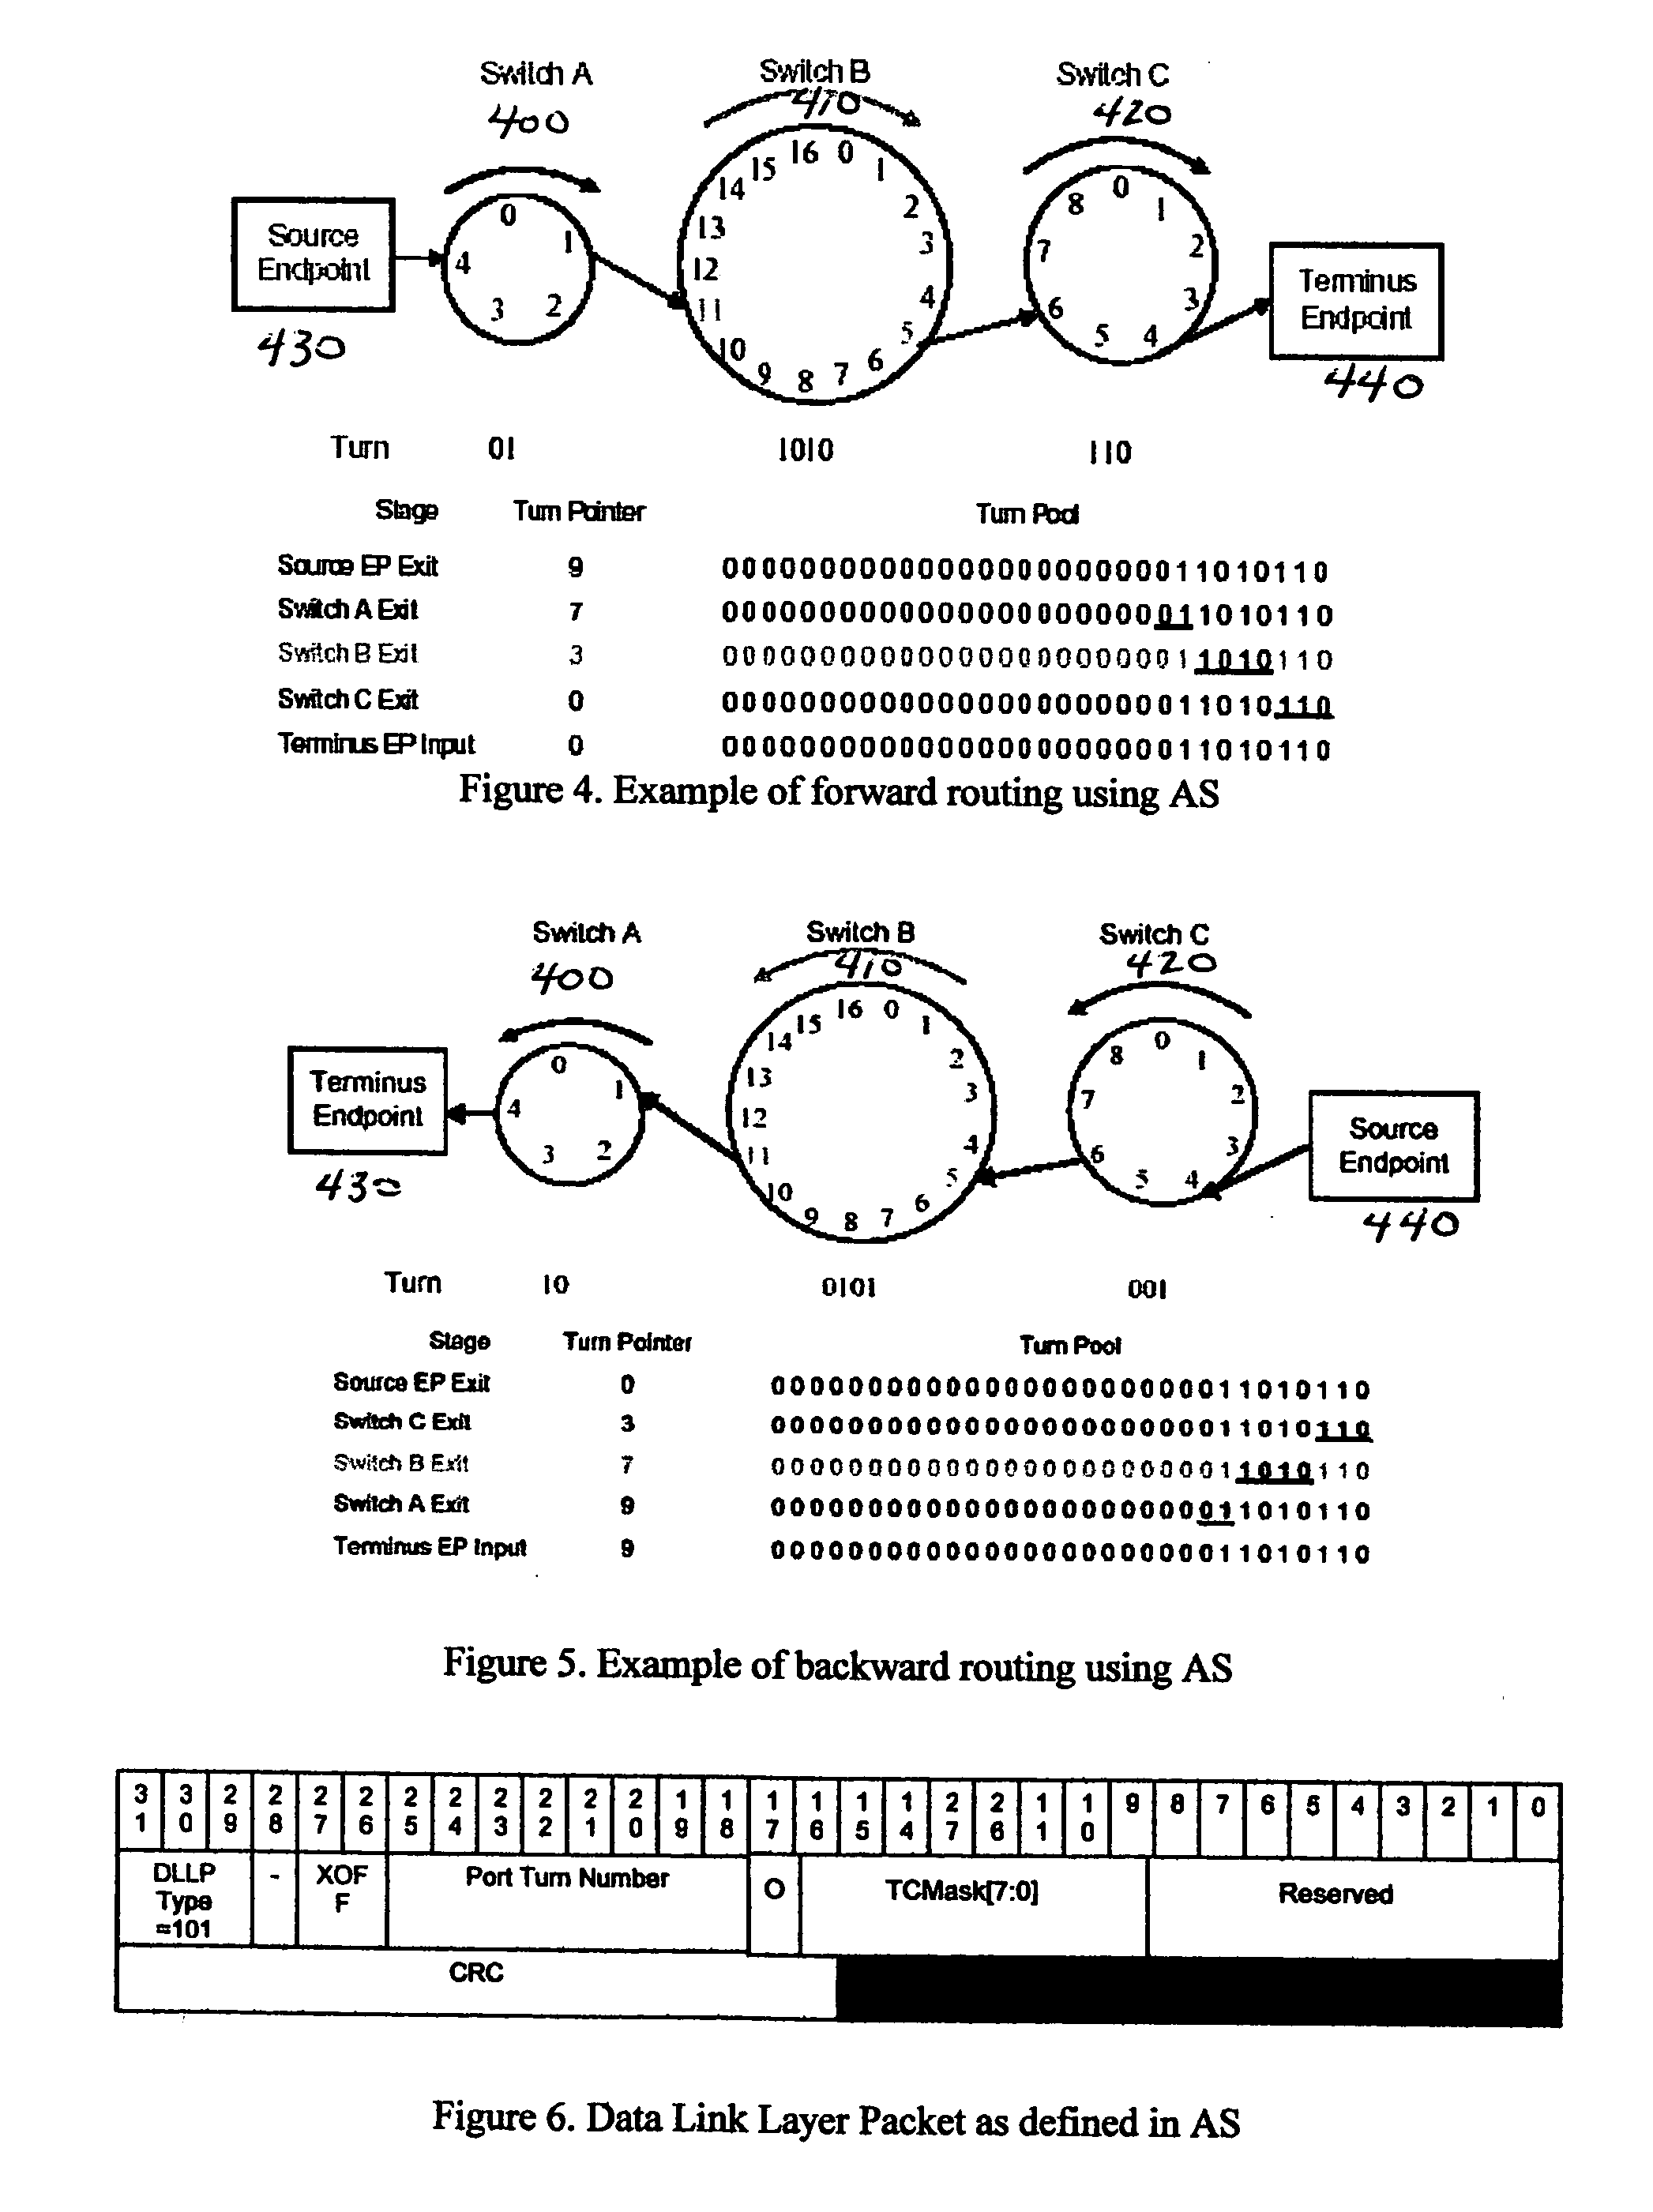 System and method to identify and communicate congested flows in a network fabric